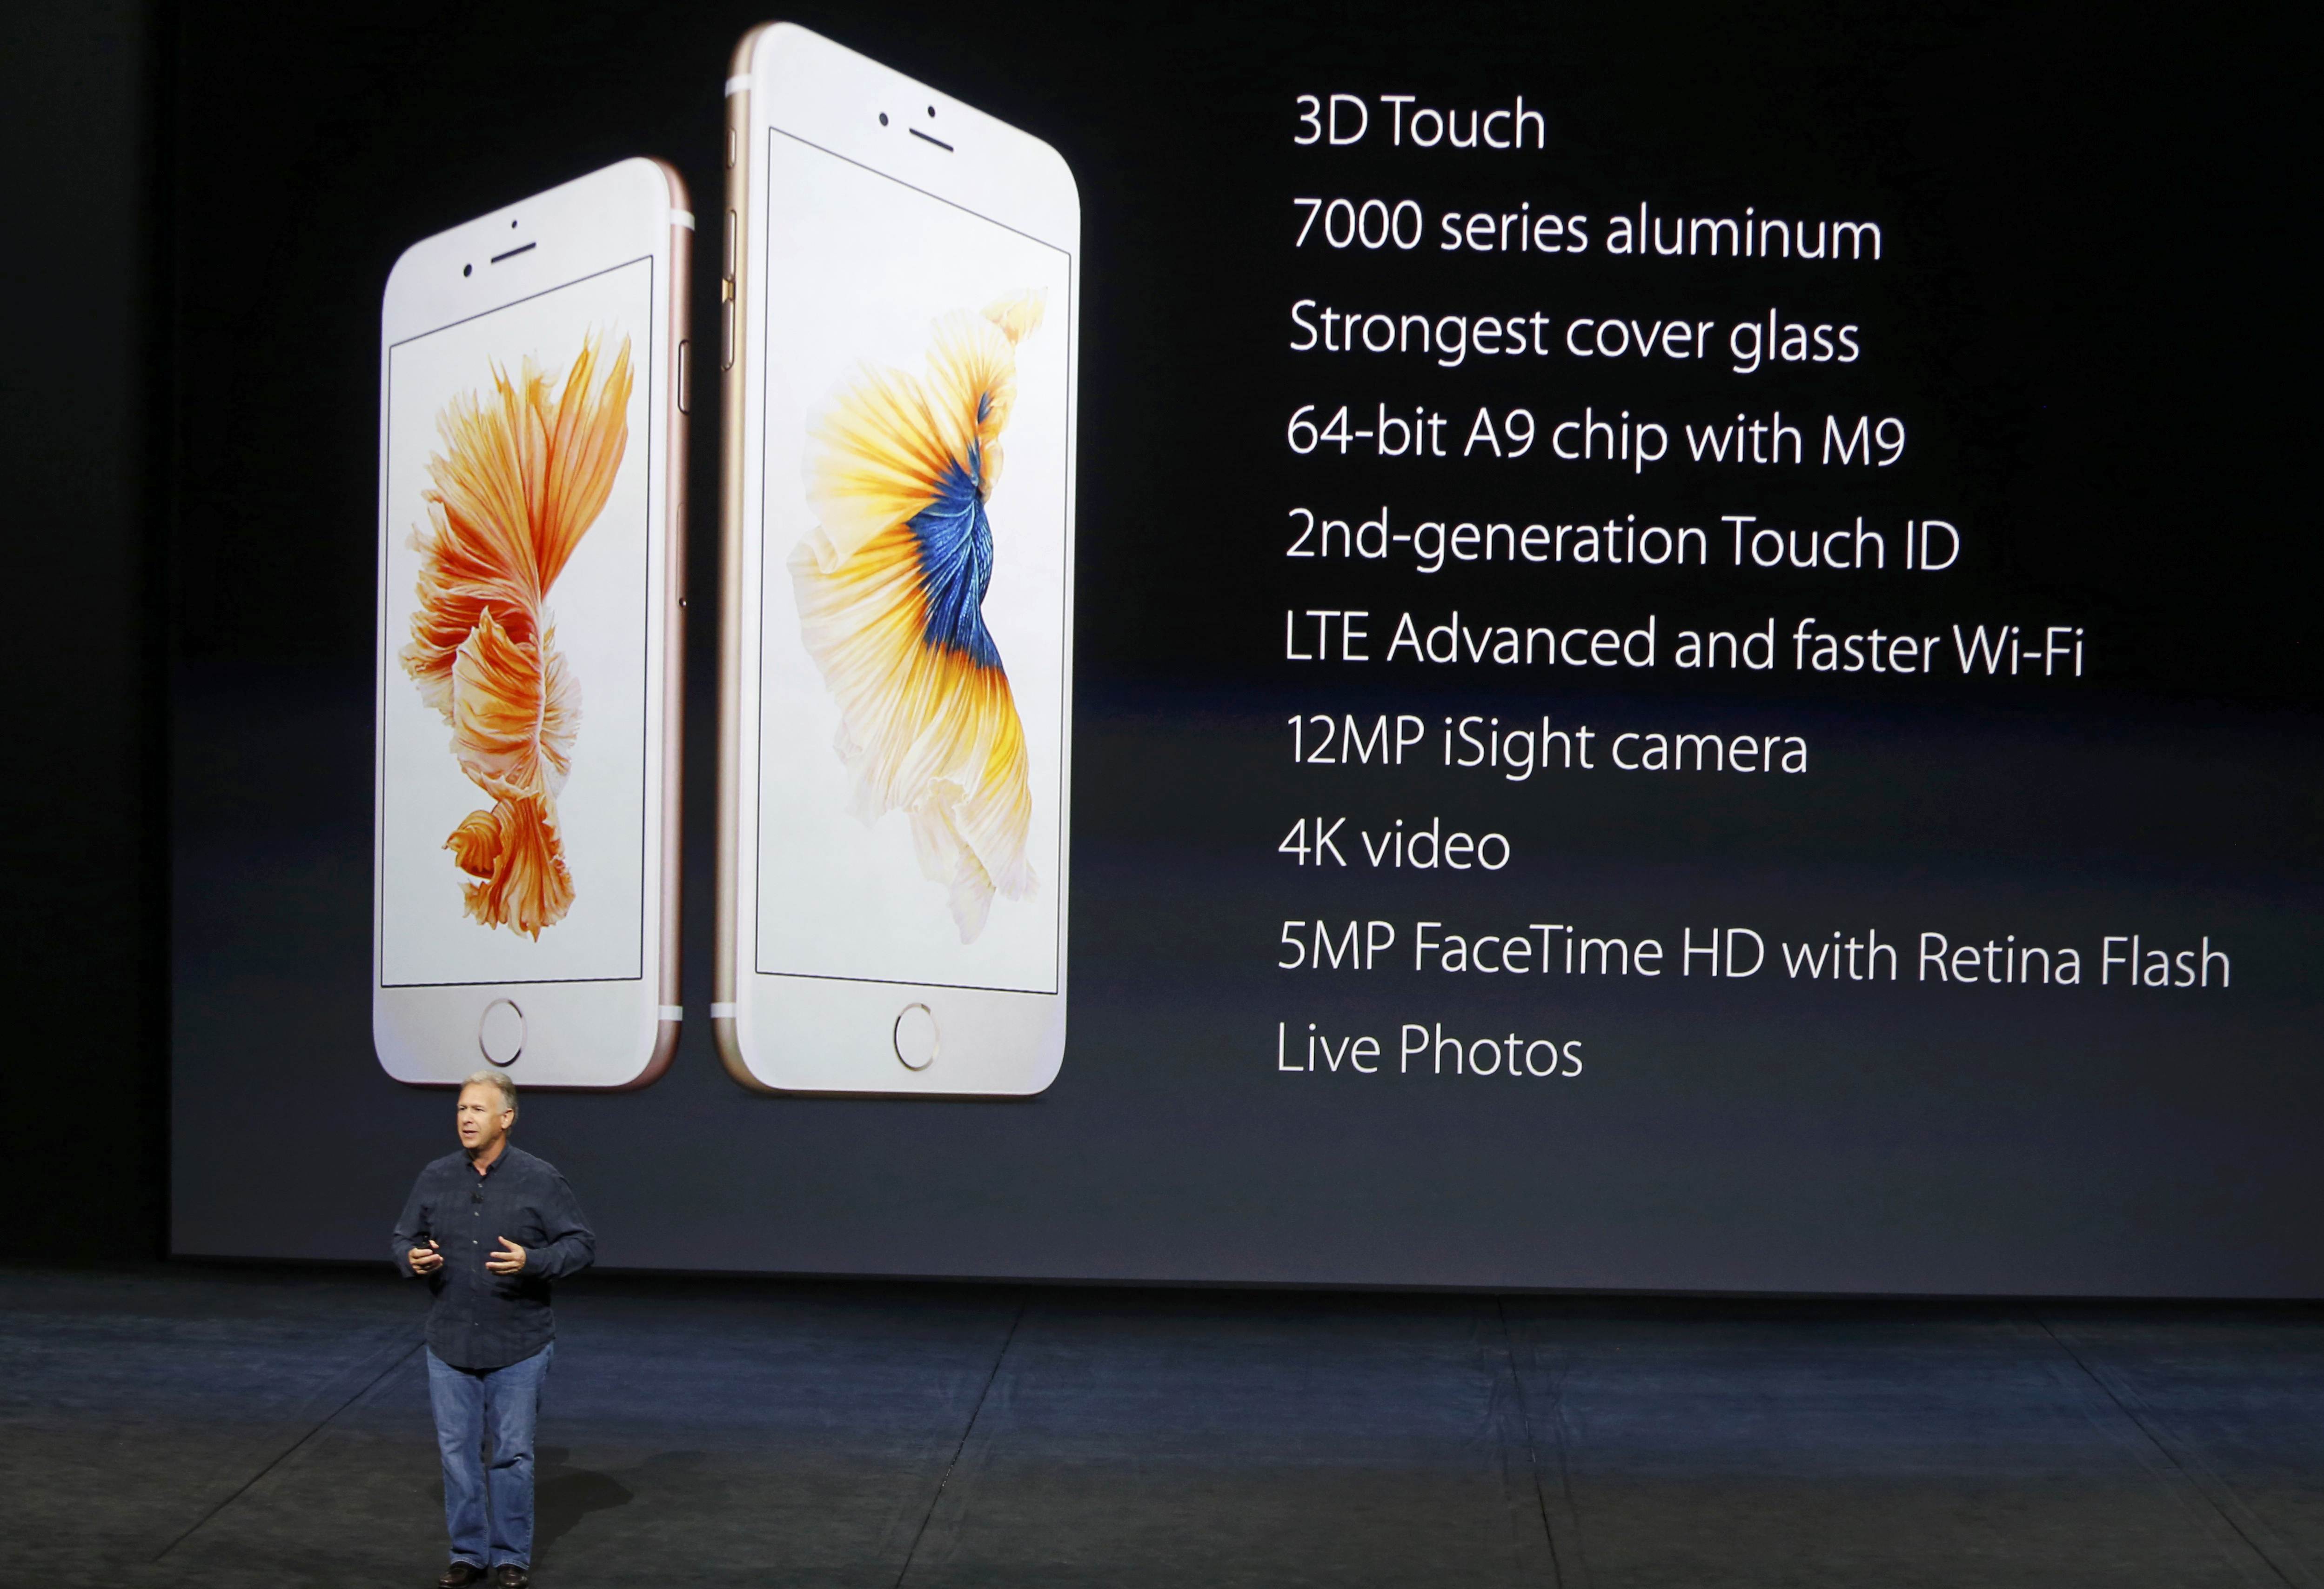 Apple unveils new iPhone, bigger iPad, revamped online video box for TV